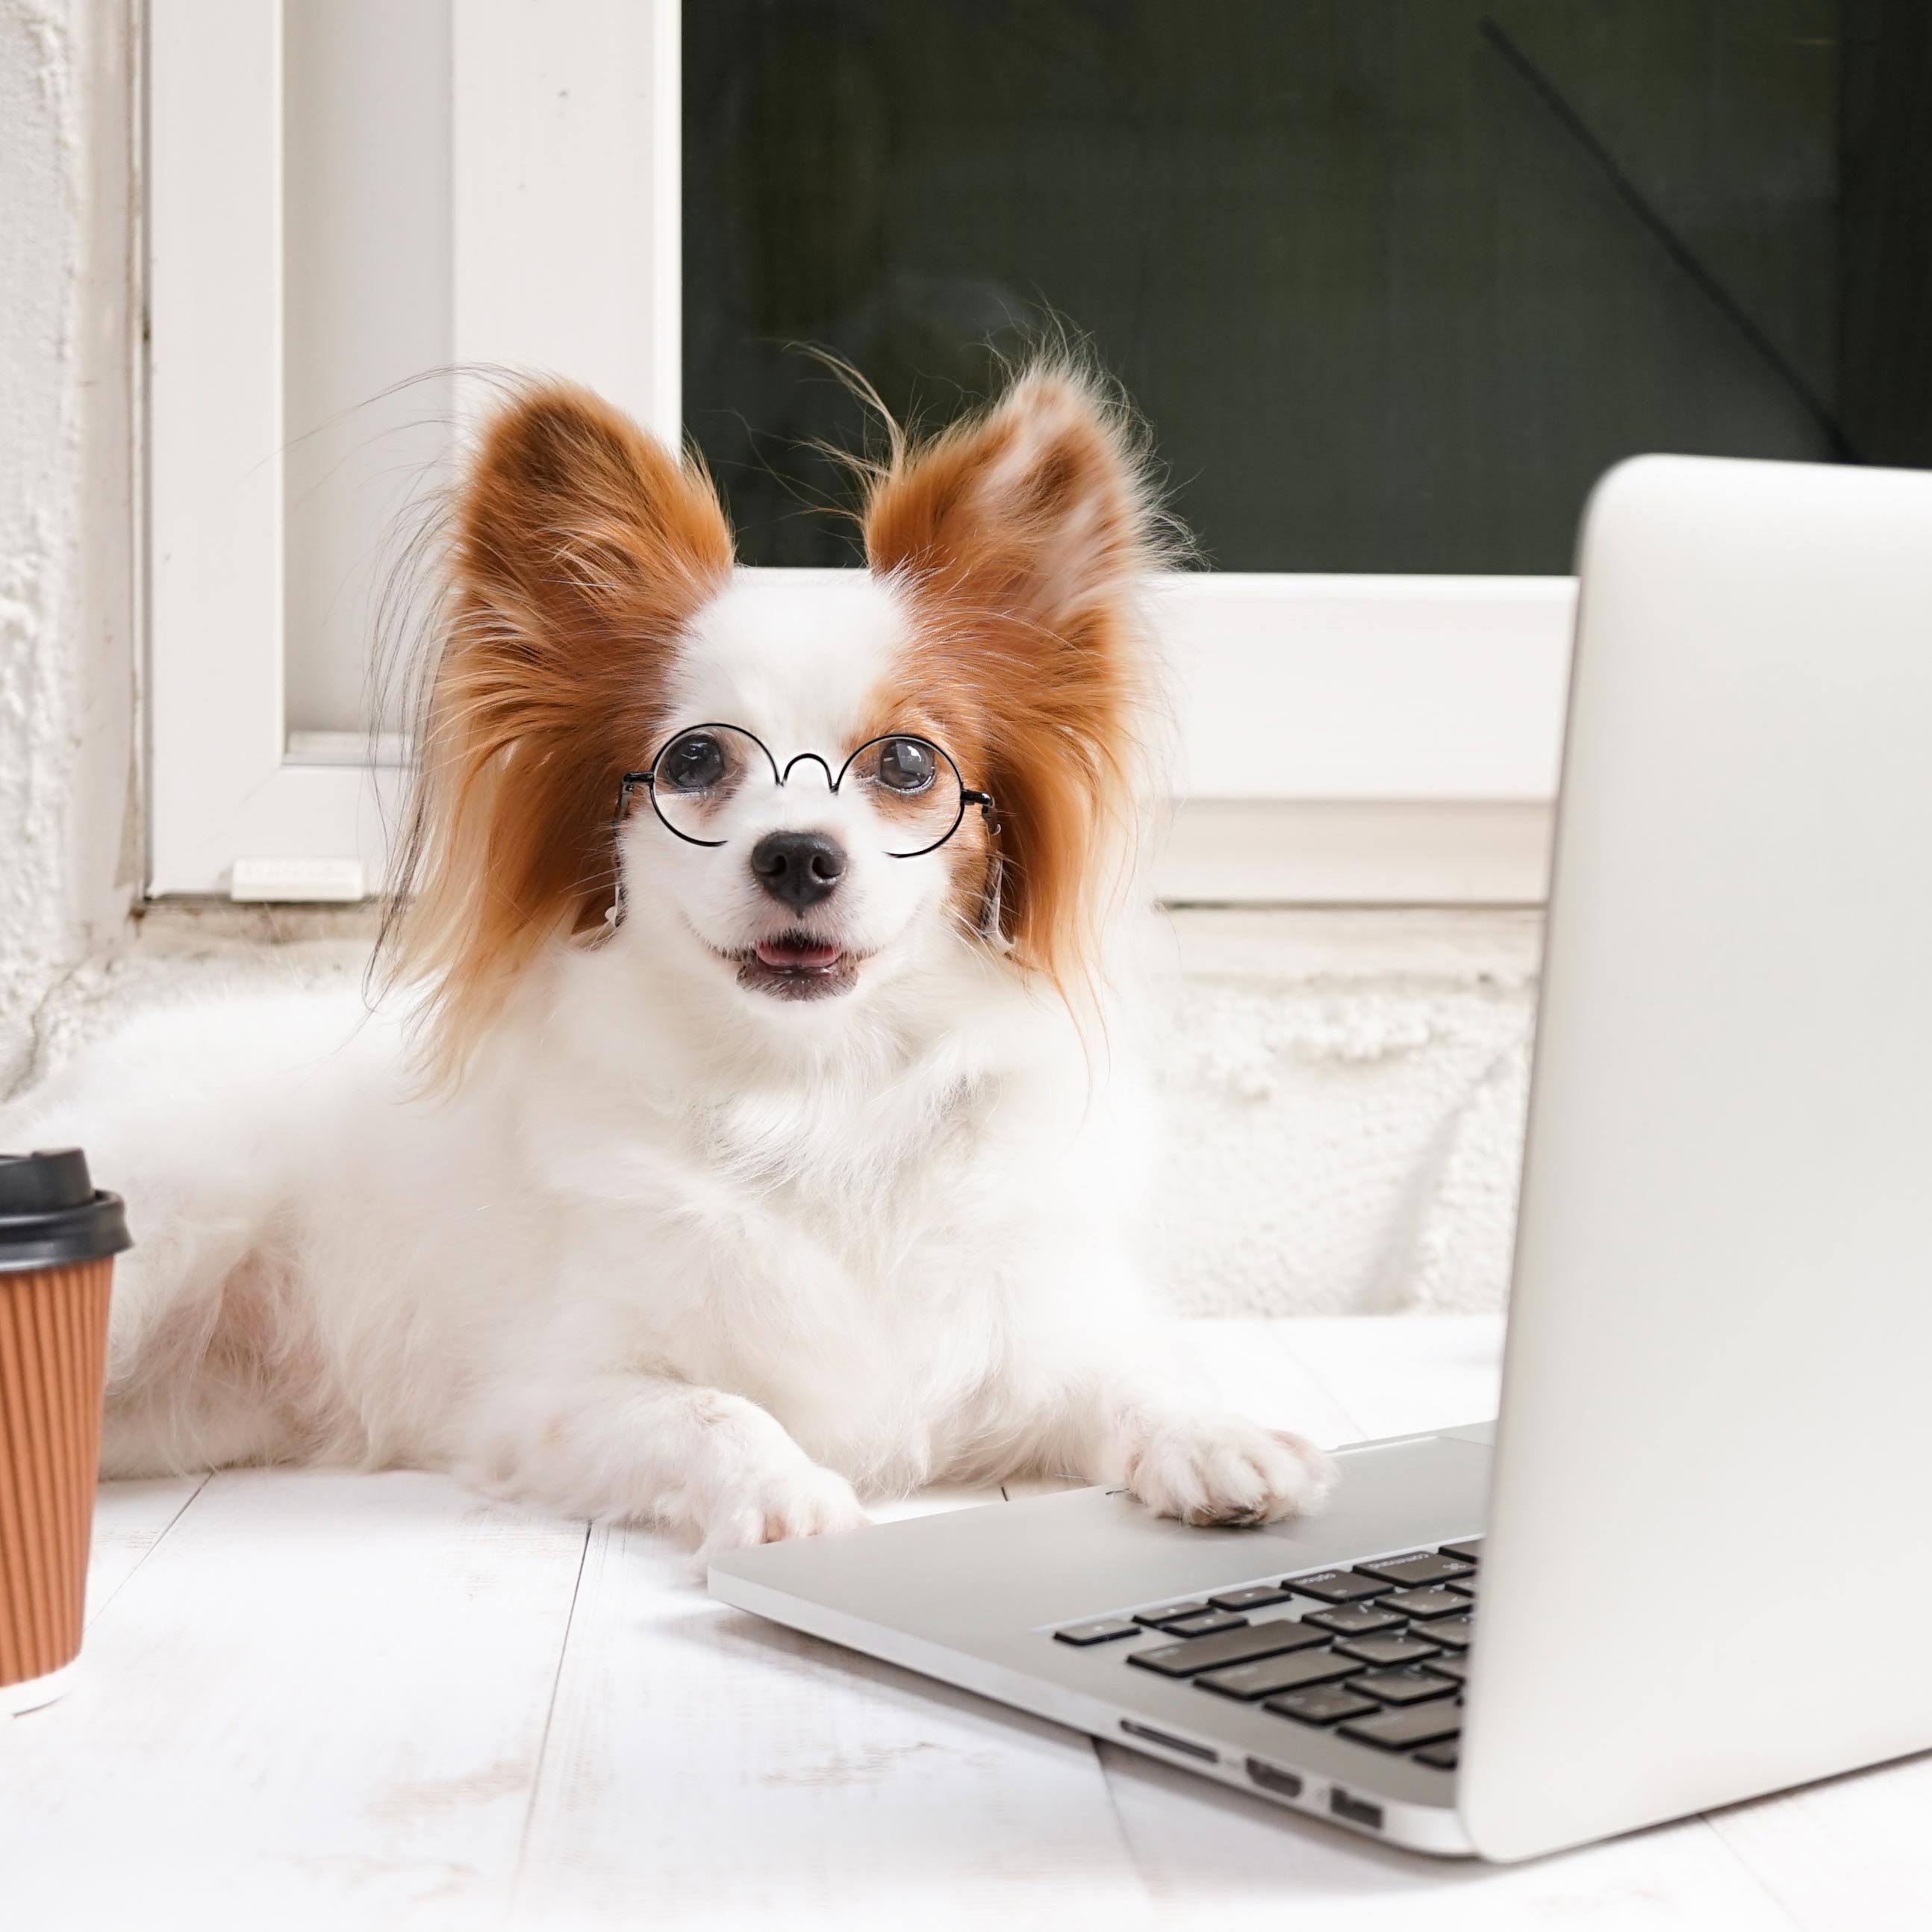 Funny Photos of Dogs "Working from Home" Reader's Digest